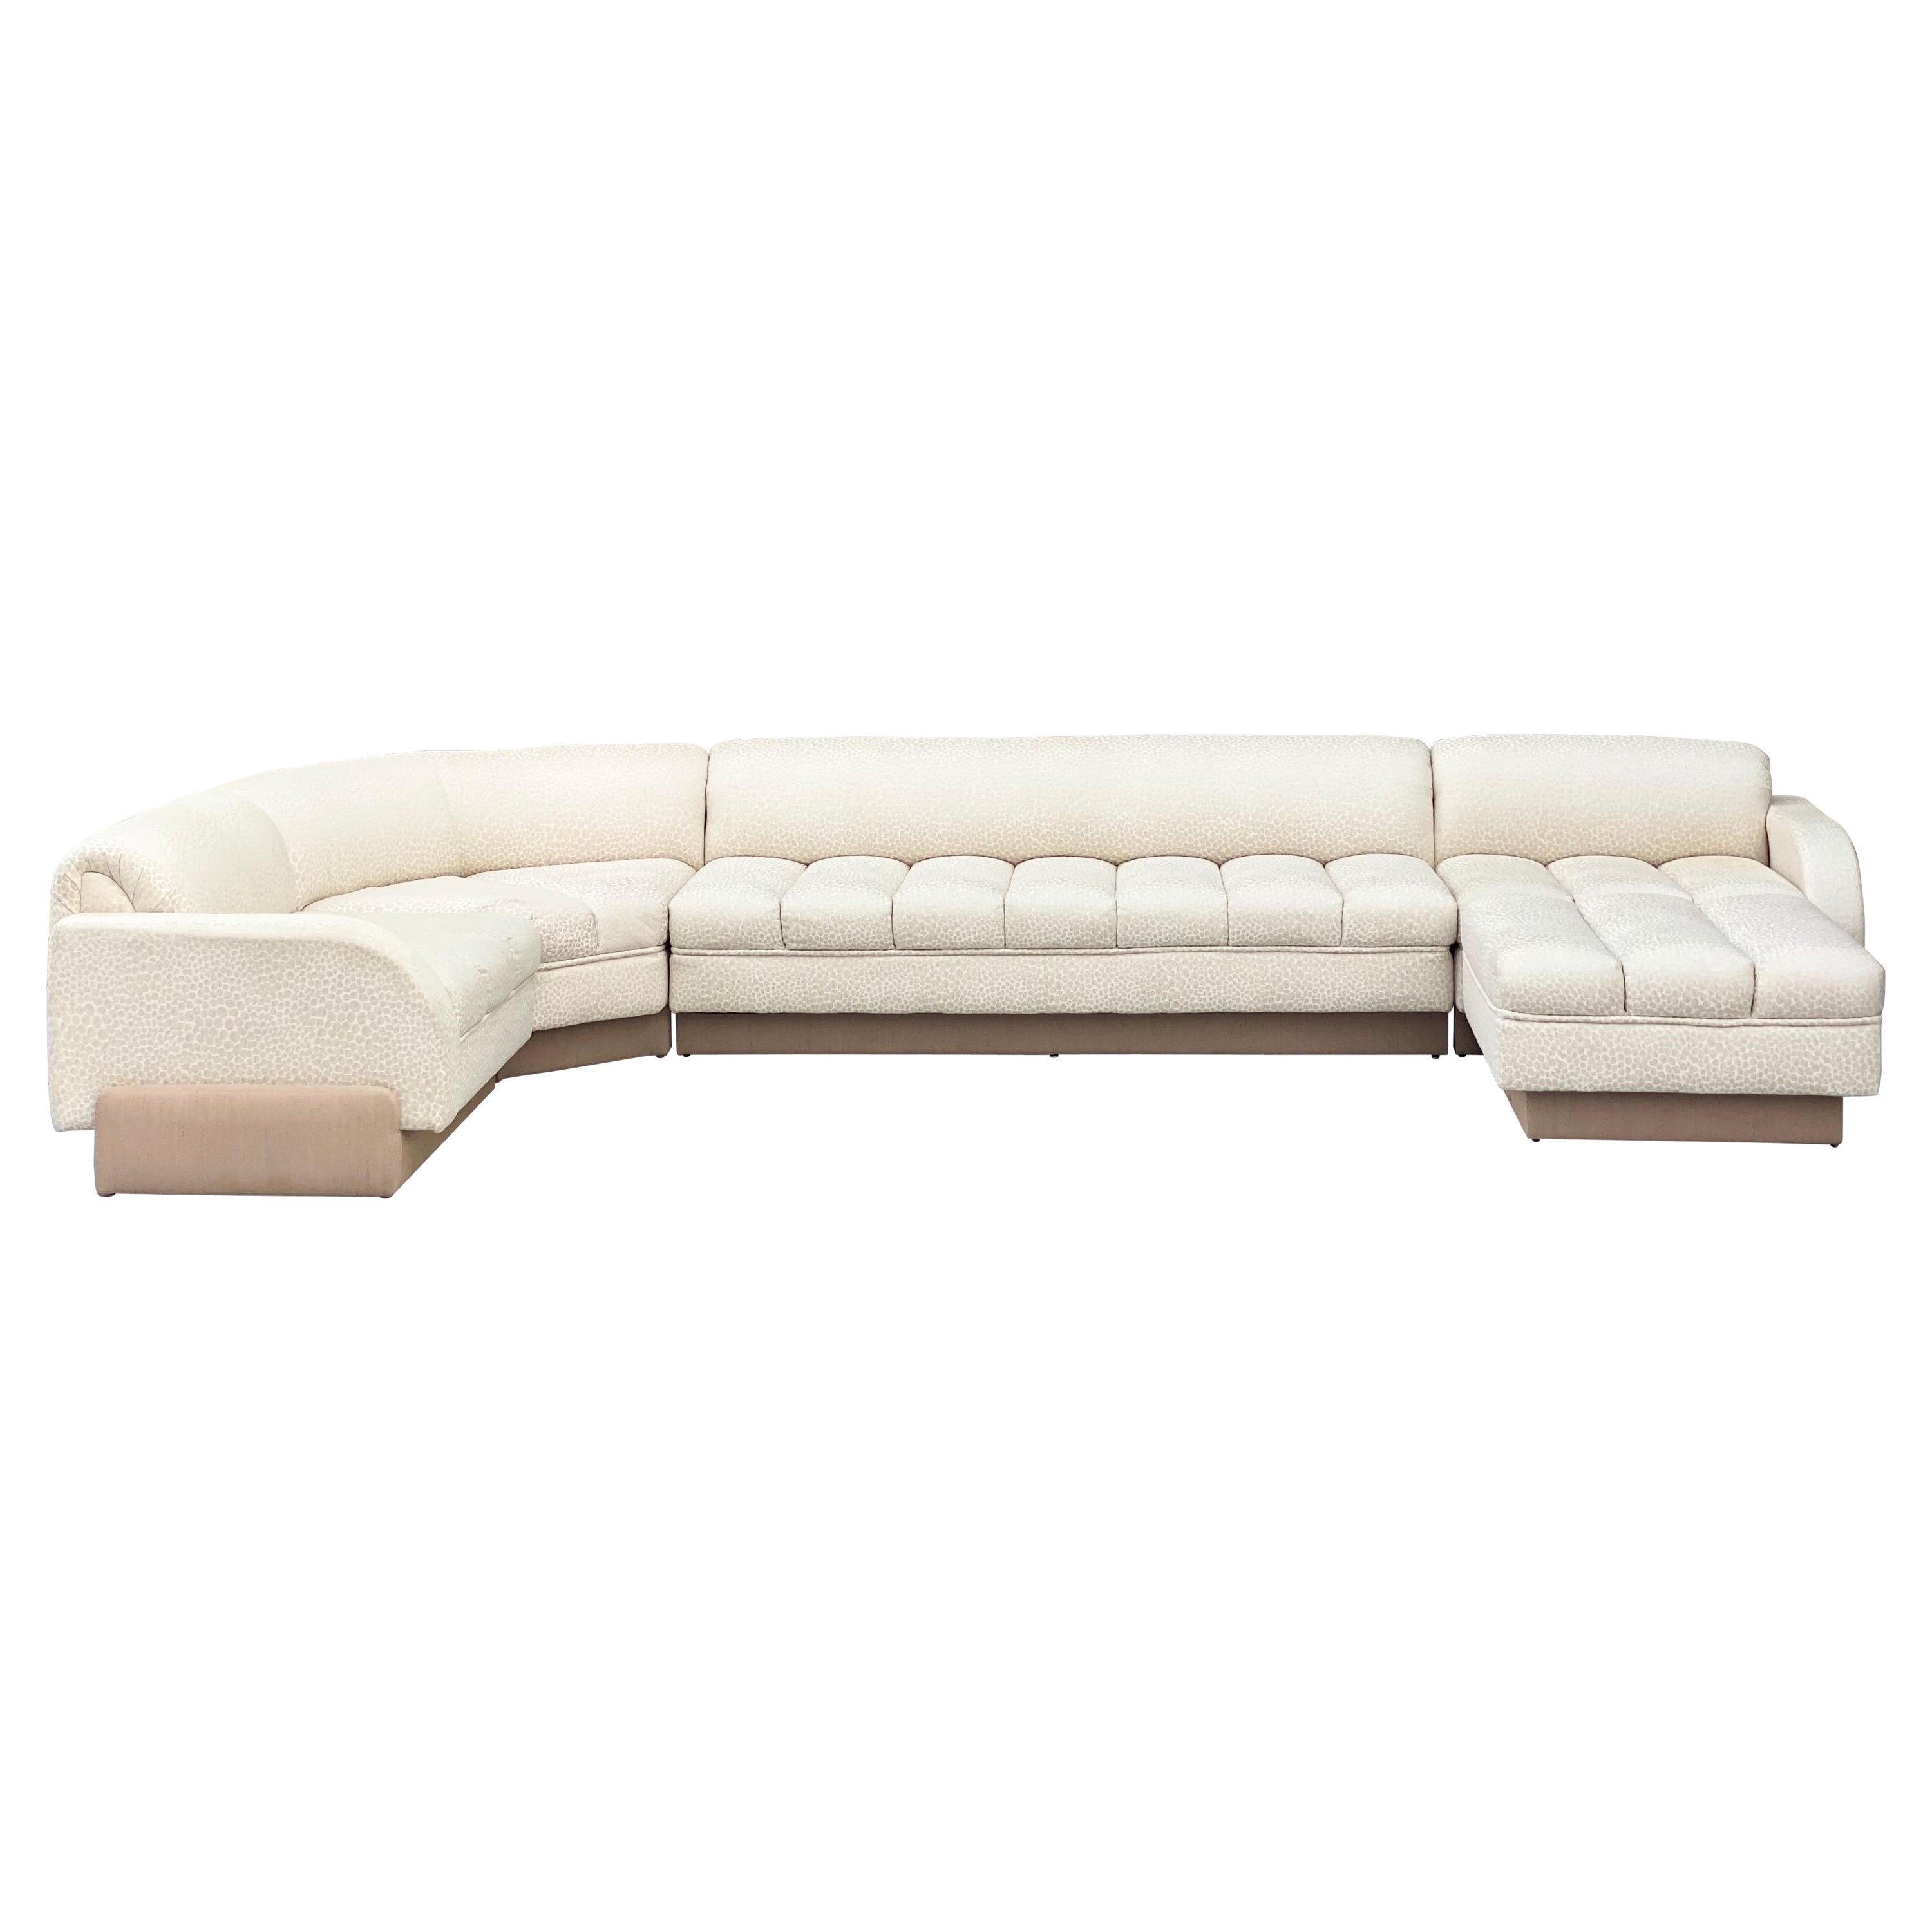 1970s Directional White Channel Four Piece Sectional Sofa with Ottoman